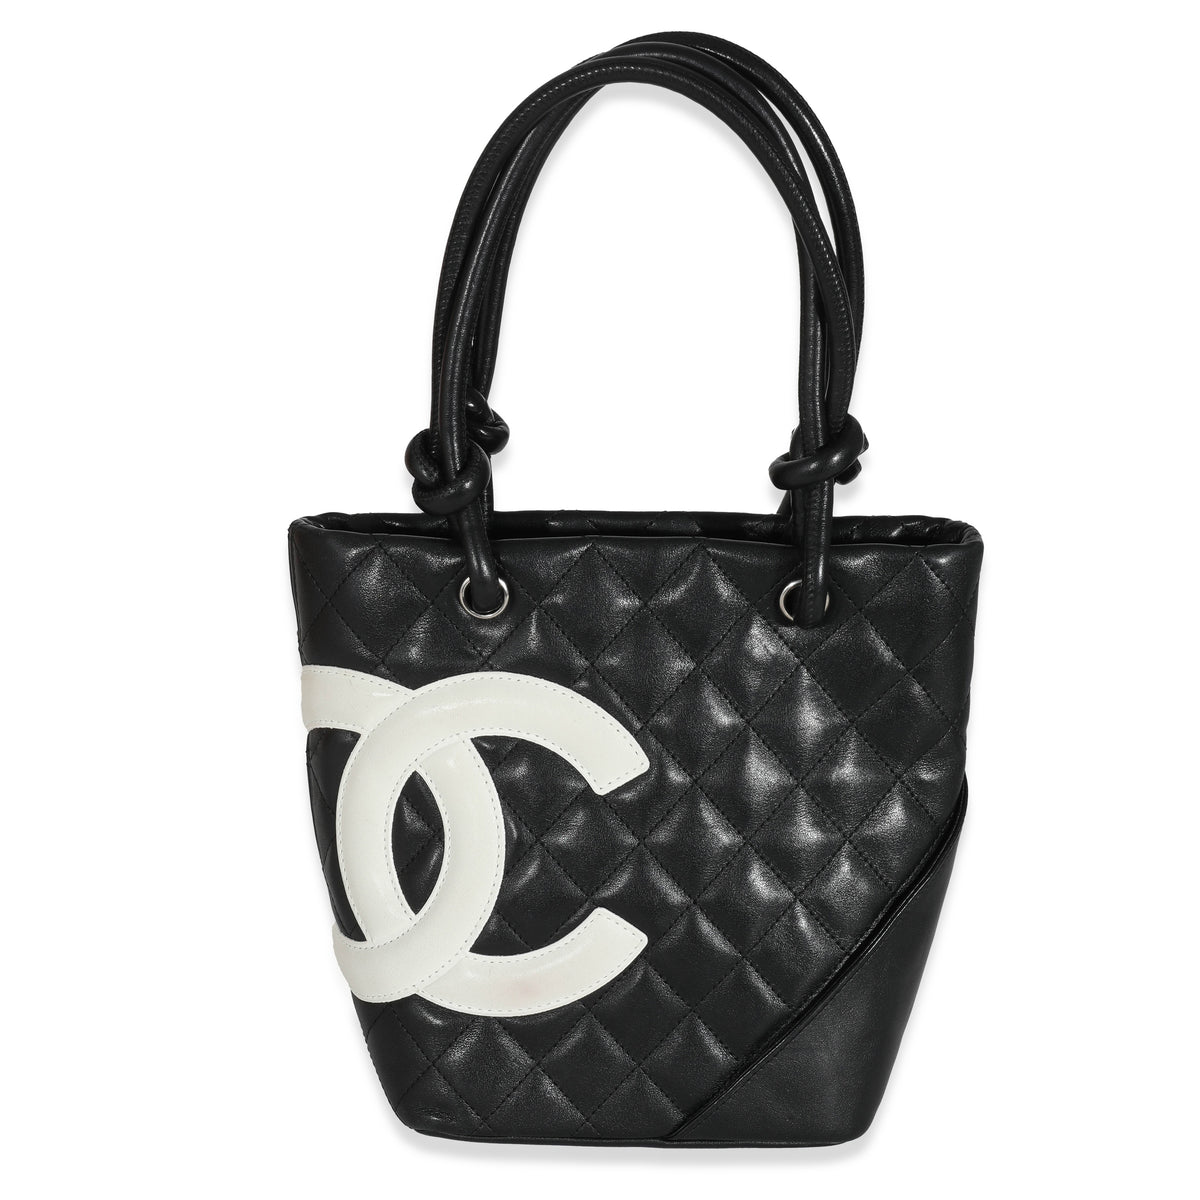 Chanel Black Quilted Leather Medium Ligne Cambon Bucket Tote Chanel